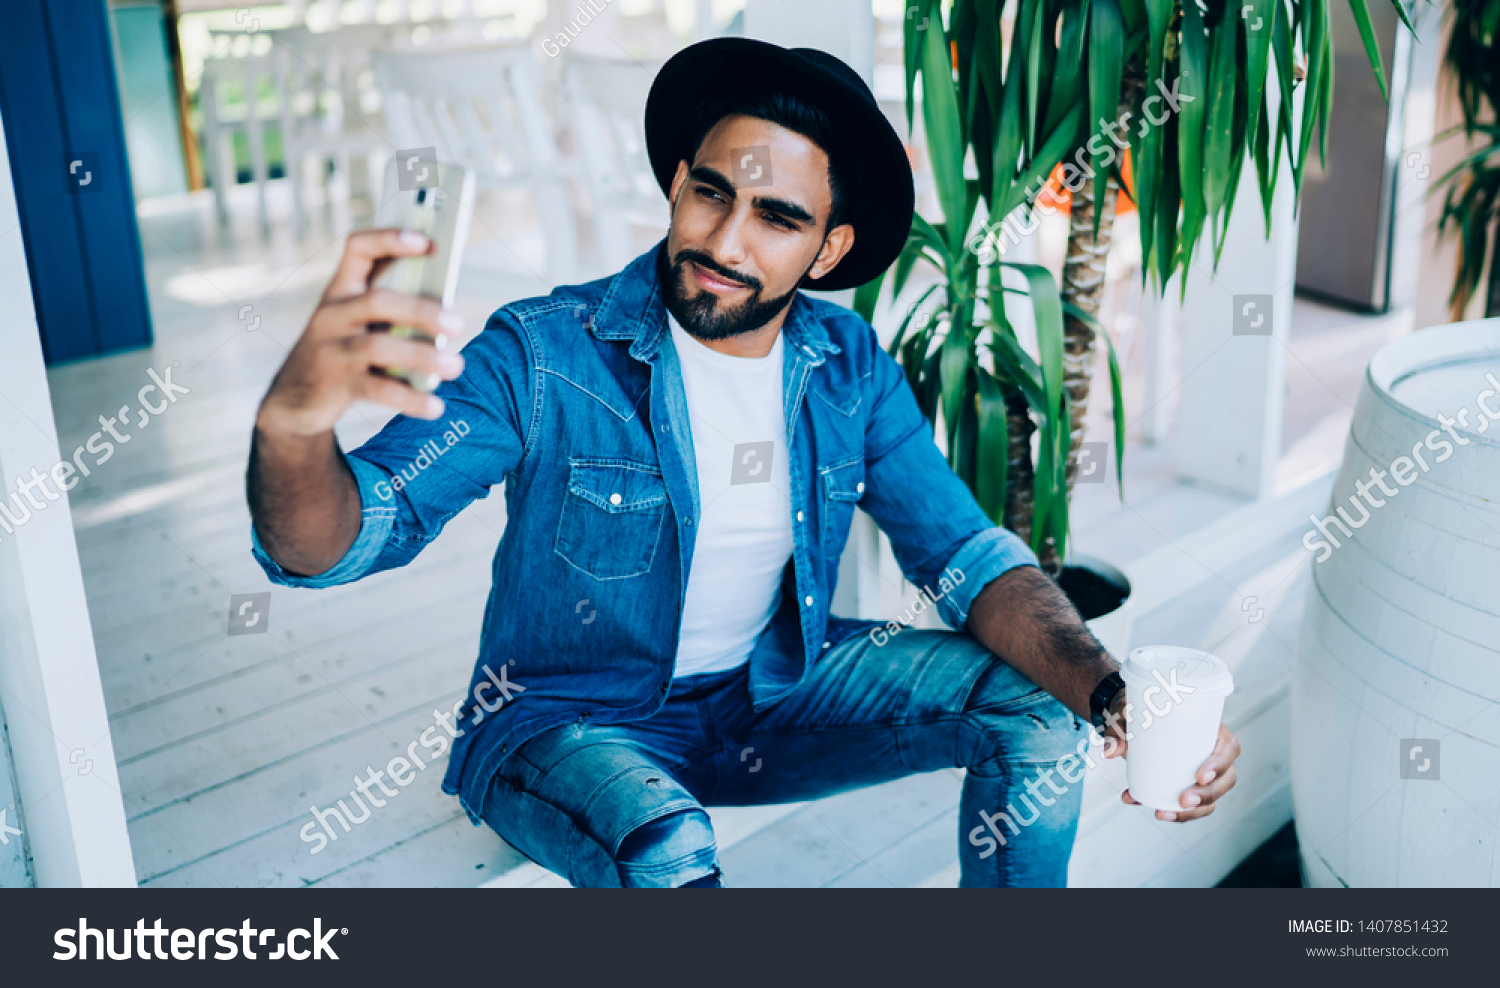 Handsome millennial guy holding takeaway cup with caffeine beverage and clicking selfie pictures, Turkish male blogger photographing himself for creating content publication on fashion web page #1407851432